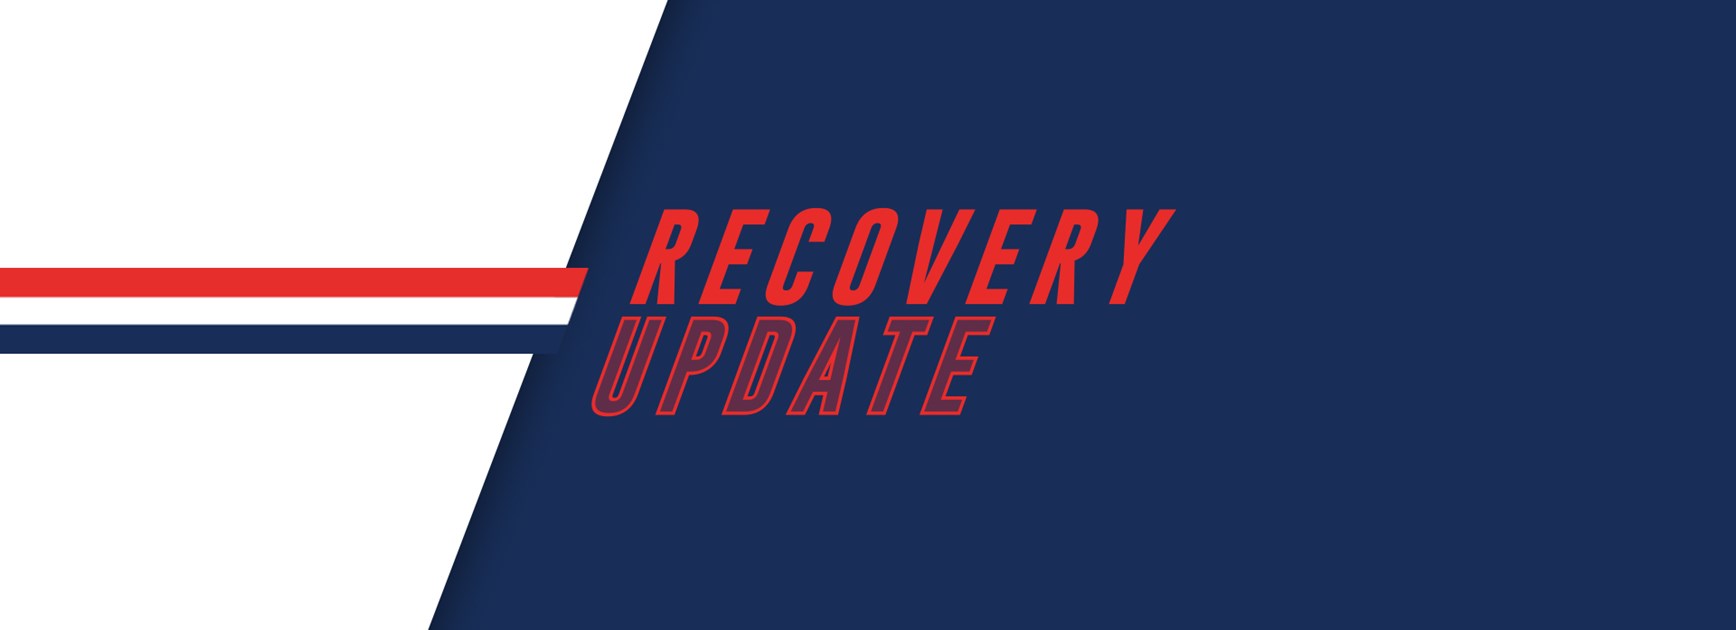 Recovery Update Round 14